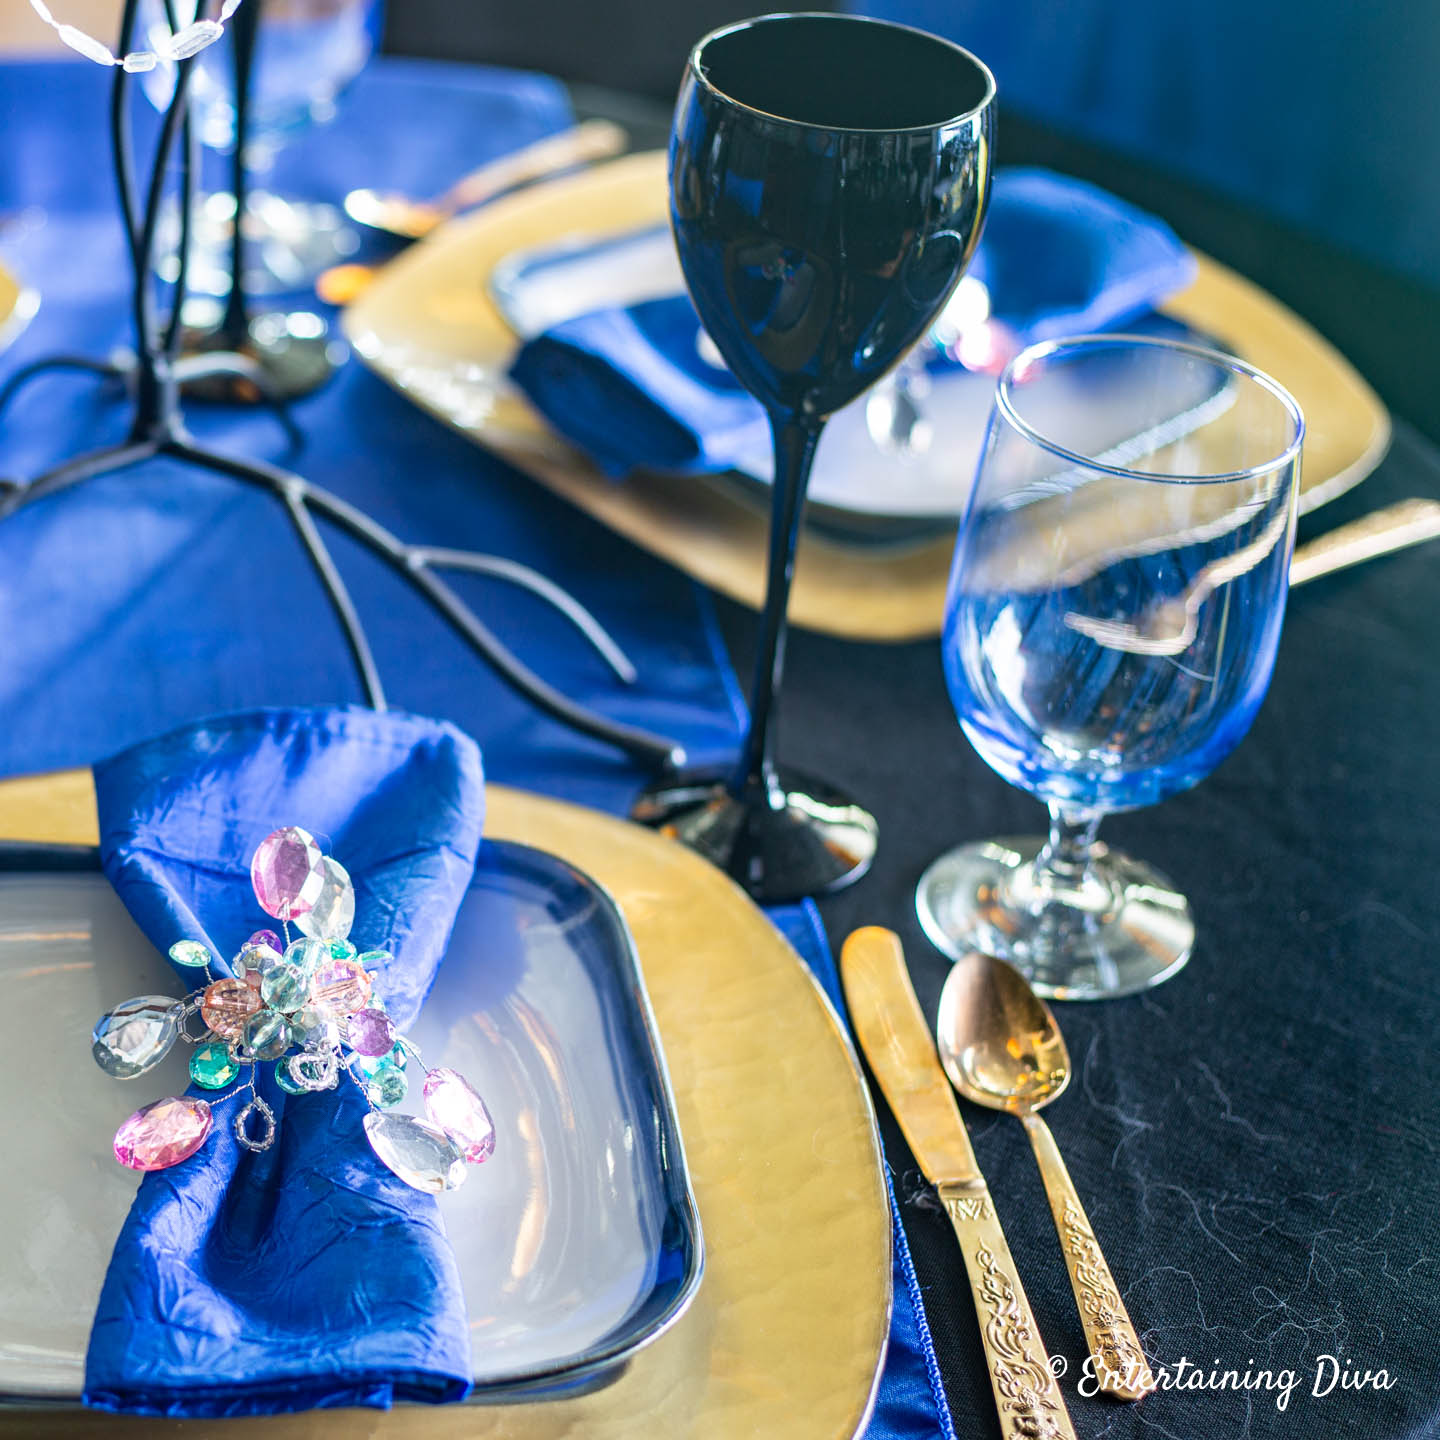 Place setting with a blue napkin and water glass, gold charger and cutlery, and black wine glasses